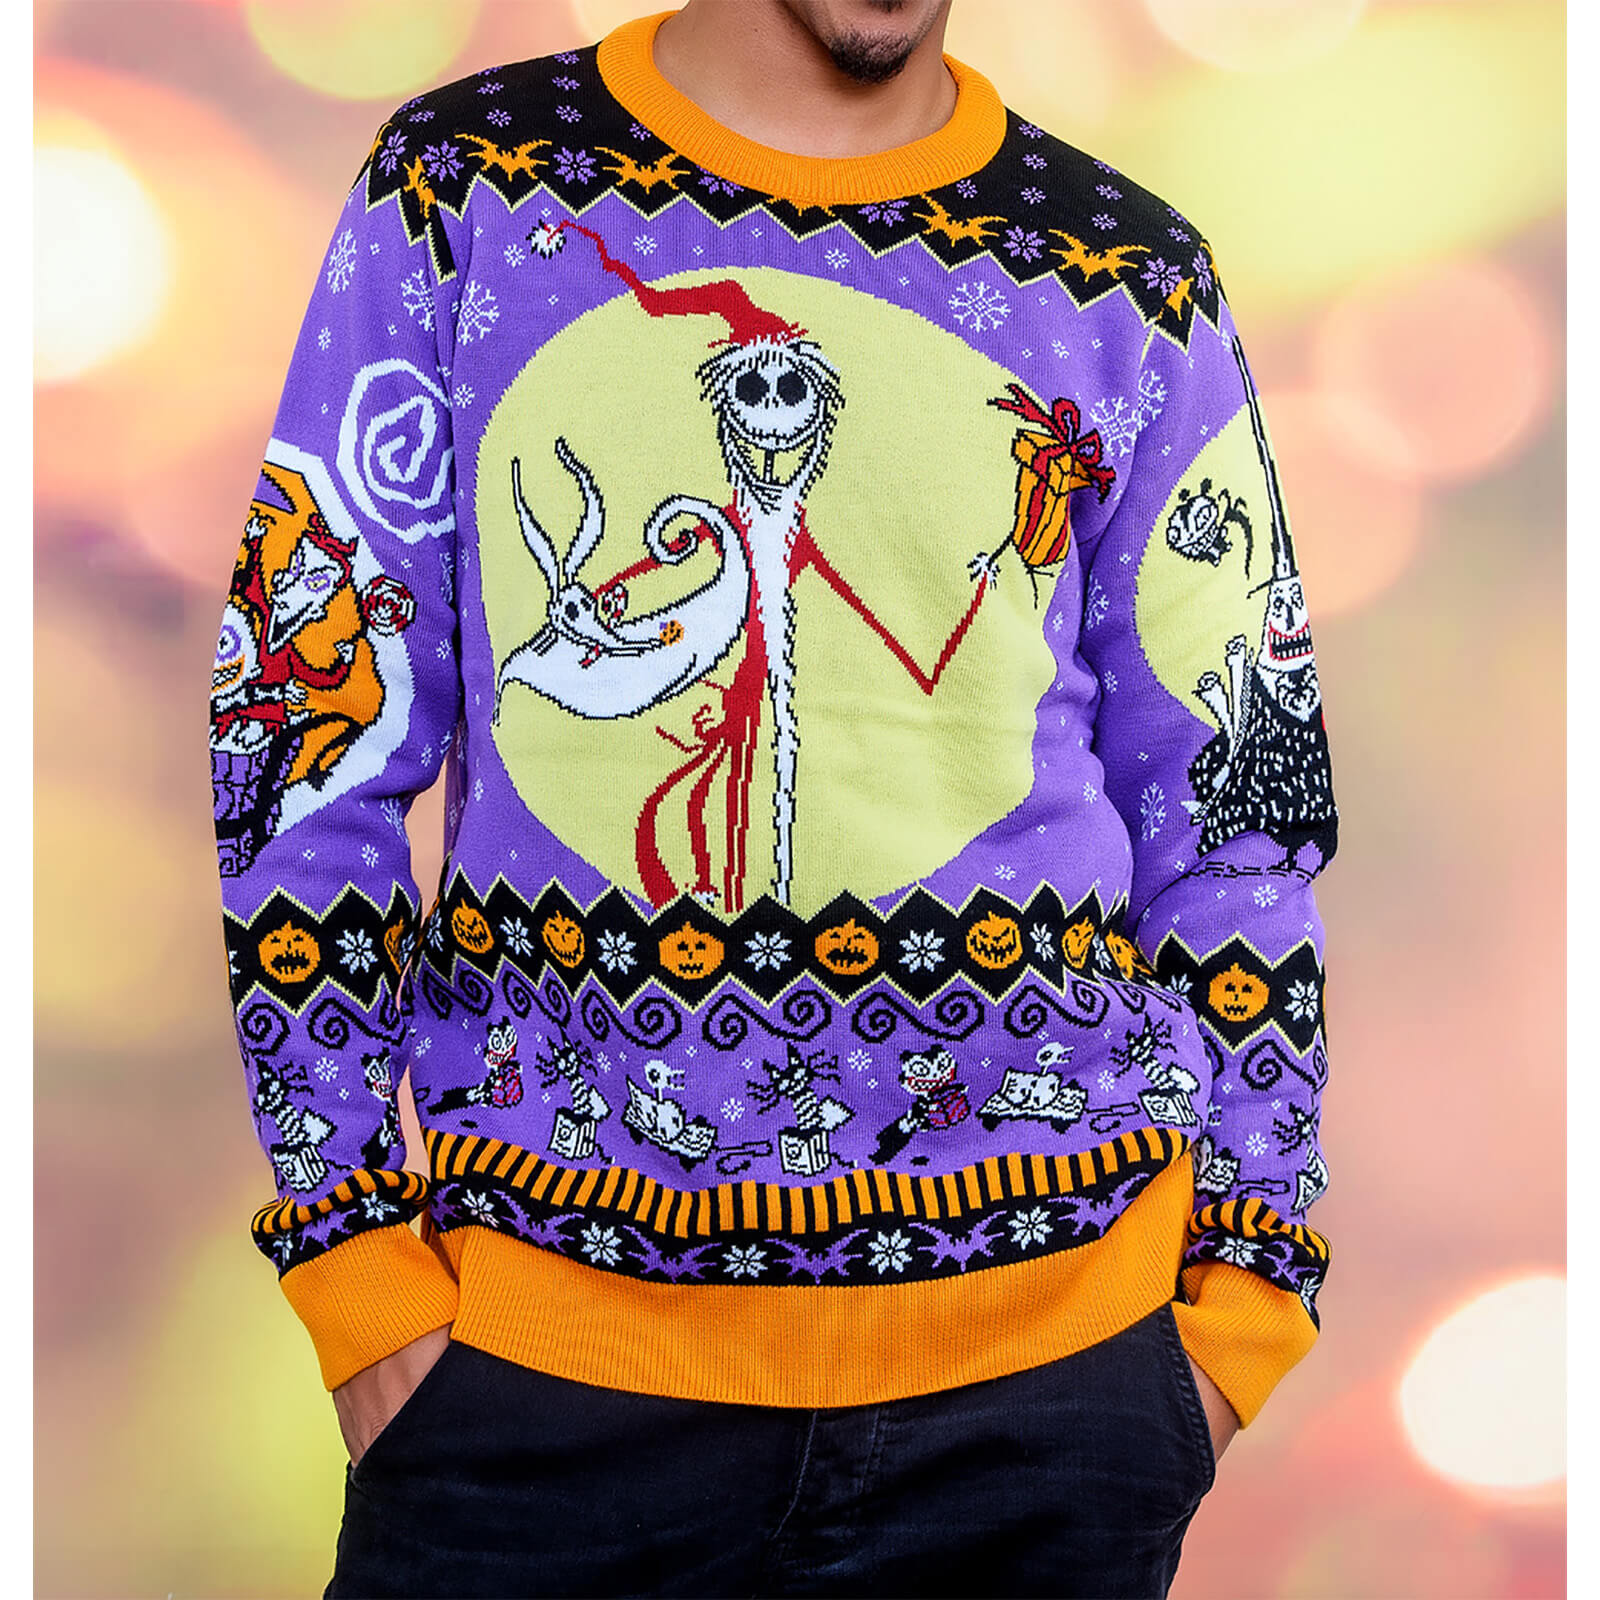 The Nightmare Before Christmas Christmas Jumper - XL